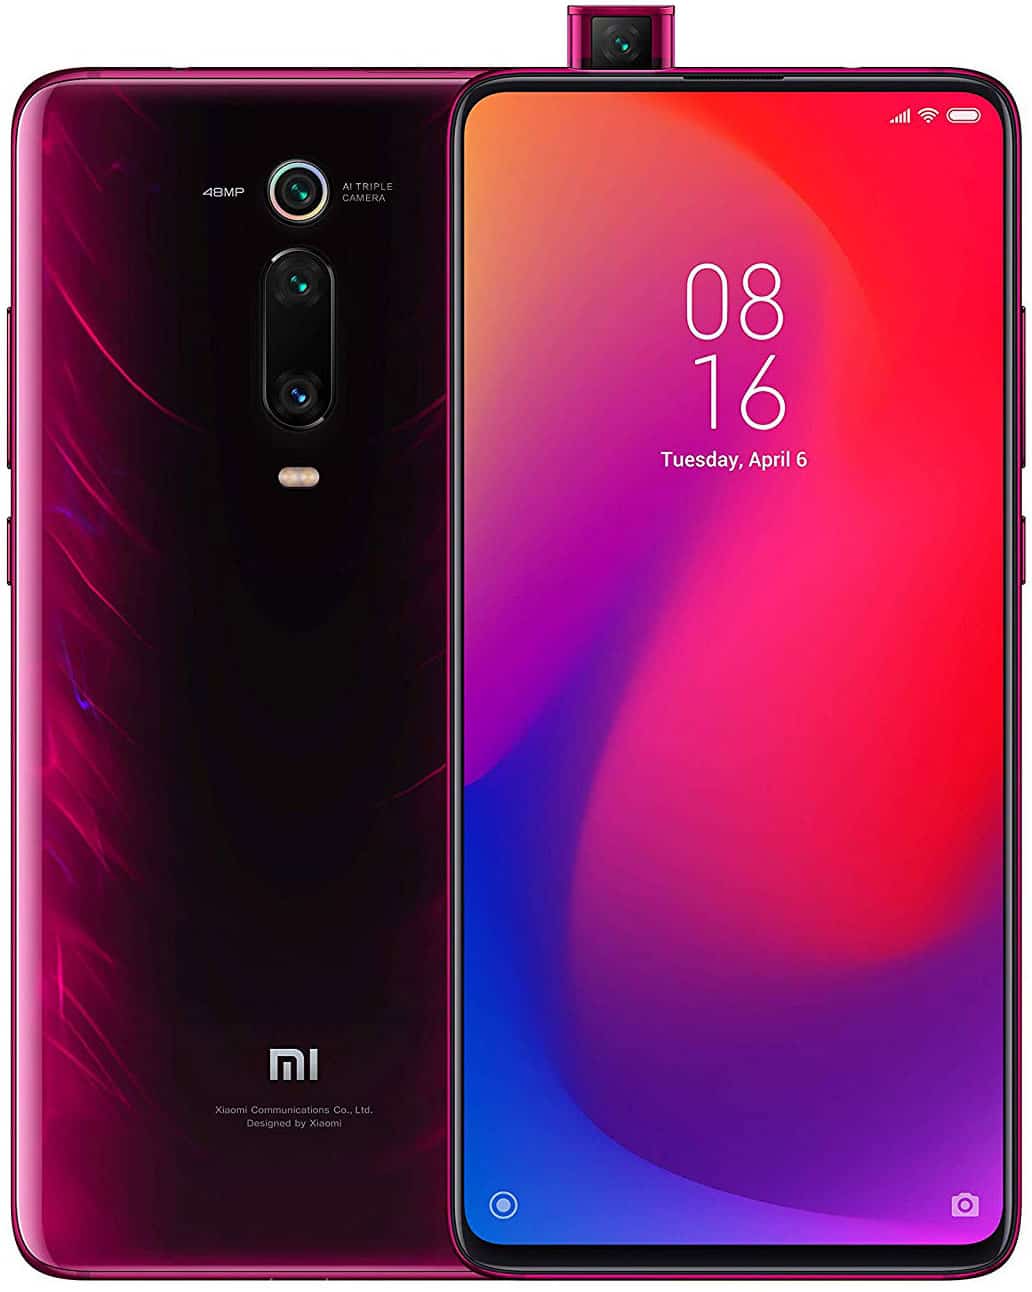 Xiaomi - Xiaomi May Relaunch The Mi 6 With New Specs & More Modern ... - Miui rom global language creators since 2010 providing support for xiaomi miui and mi home products.